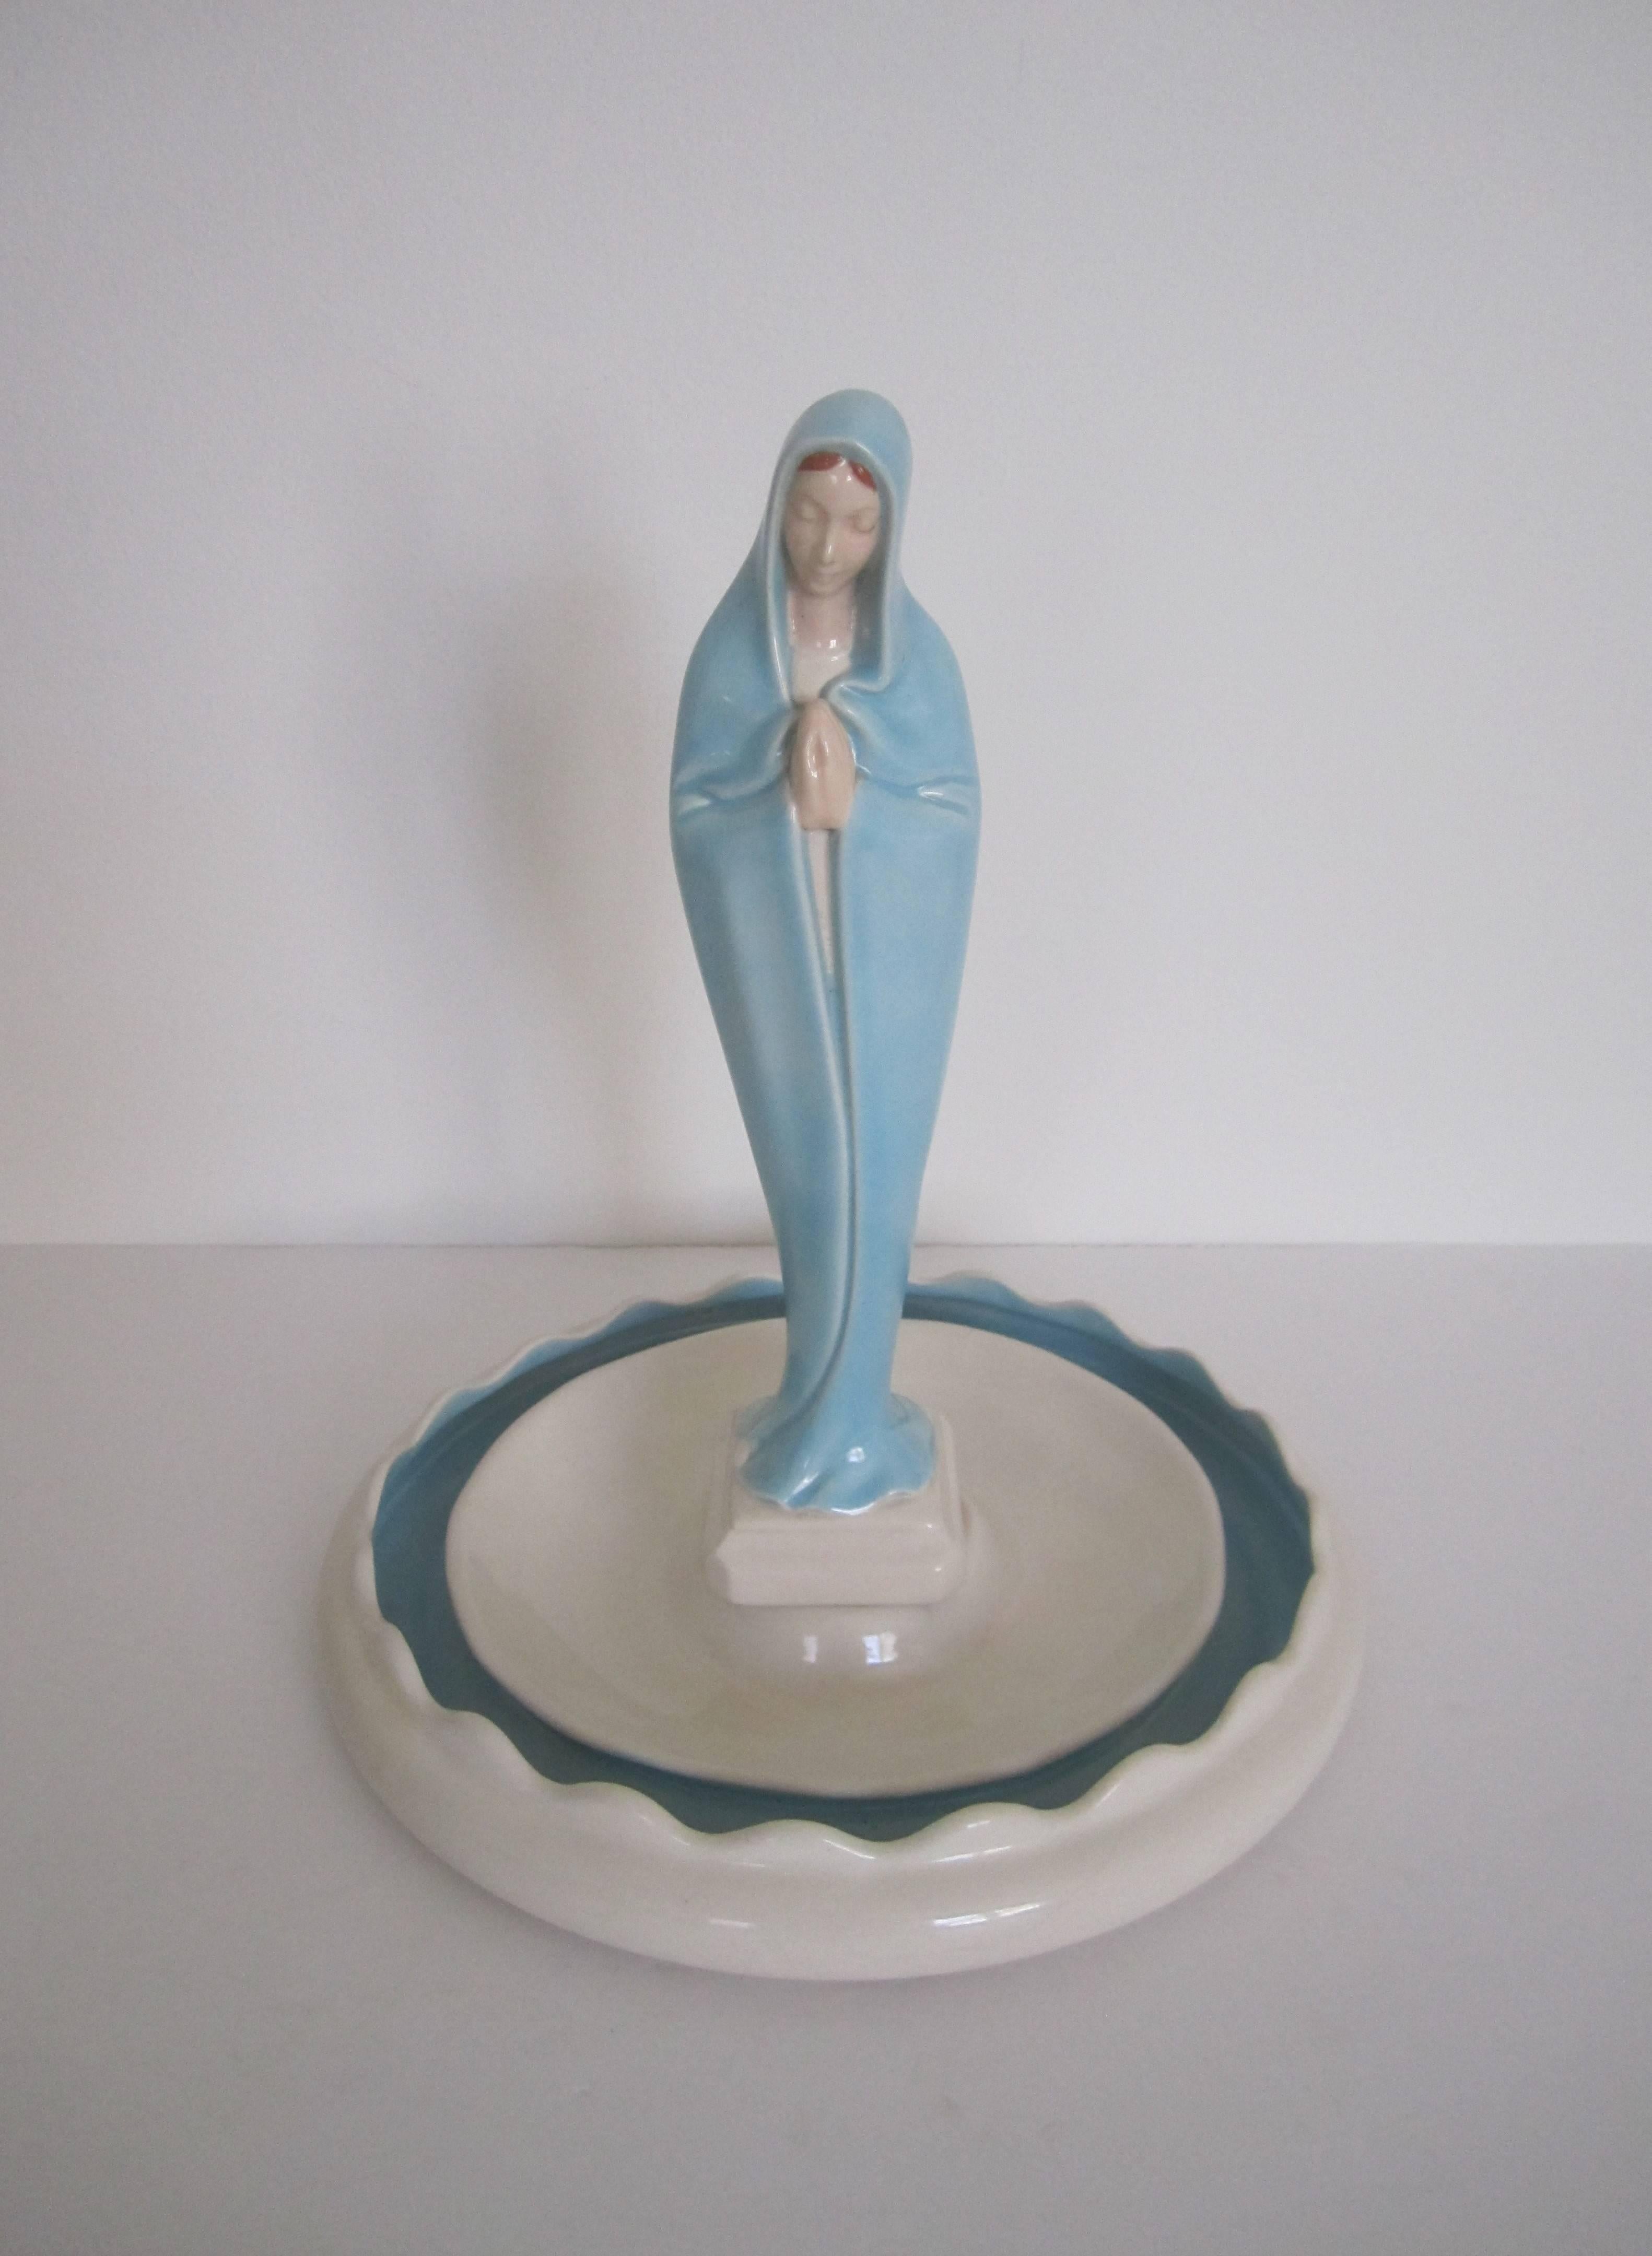 A beautiful vintage Mother Mary sculpture in traditional white and light blue in standing prayer position. Mother Mary Roman Catholic sculpture vessel is designed to hold 'Holy Water' in area just below her feet, and fresh water and small flowers or